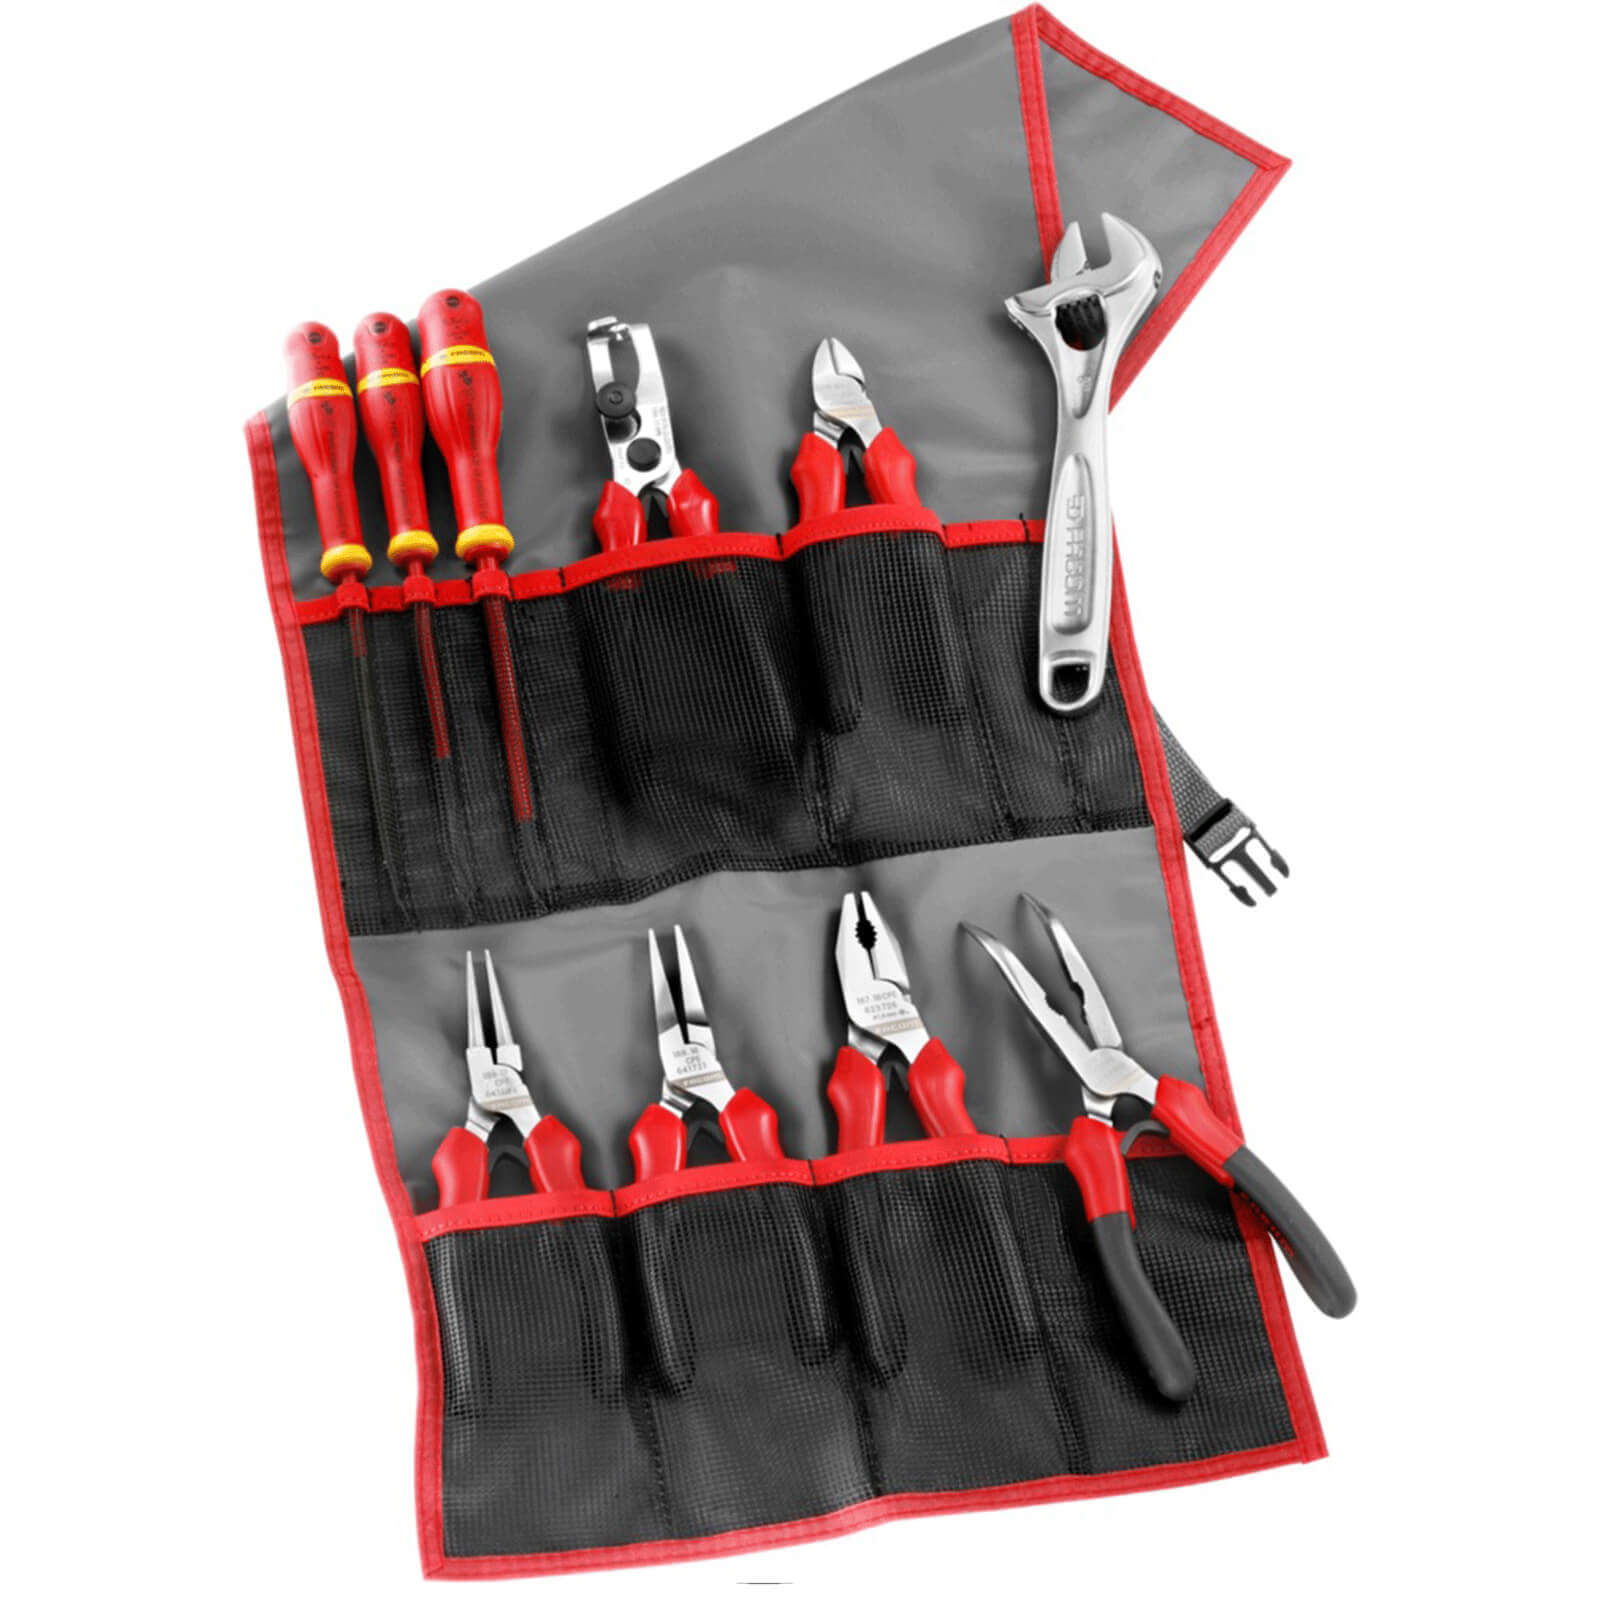 Photo of Facom 184.j4cpe 10 Piece Electricians Hand Tool Kit